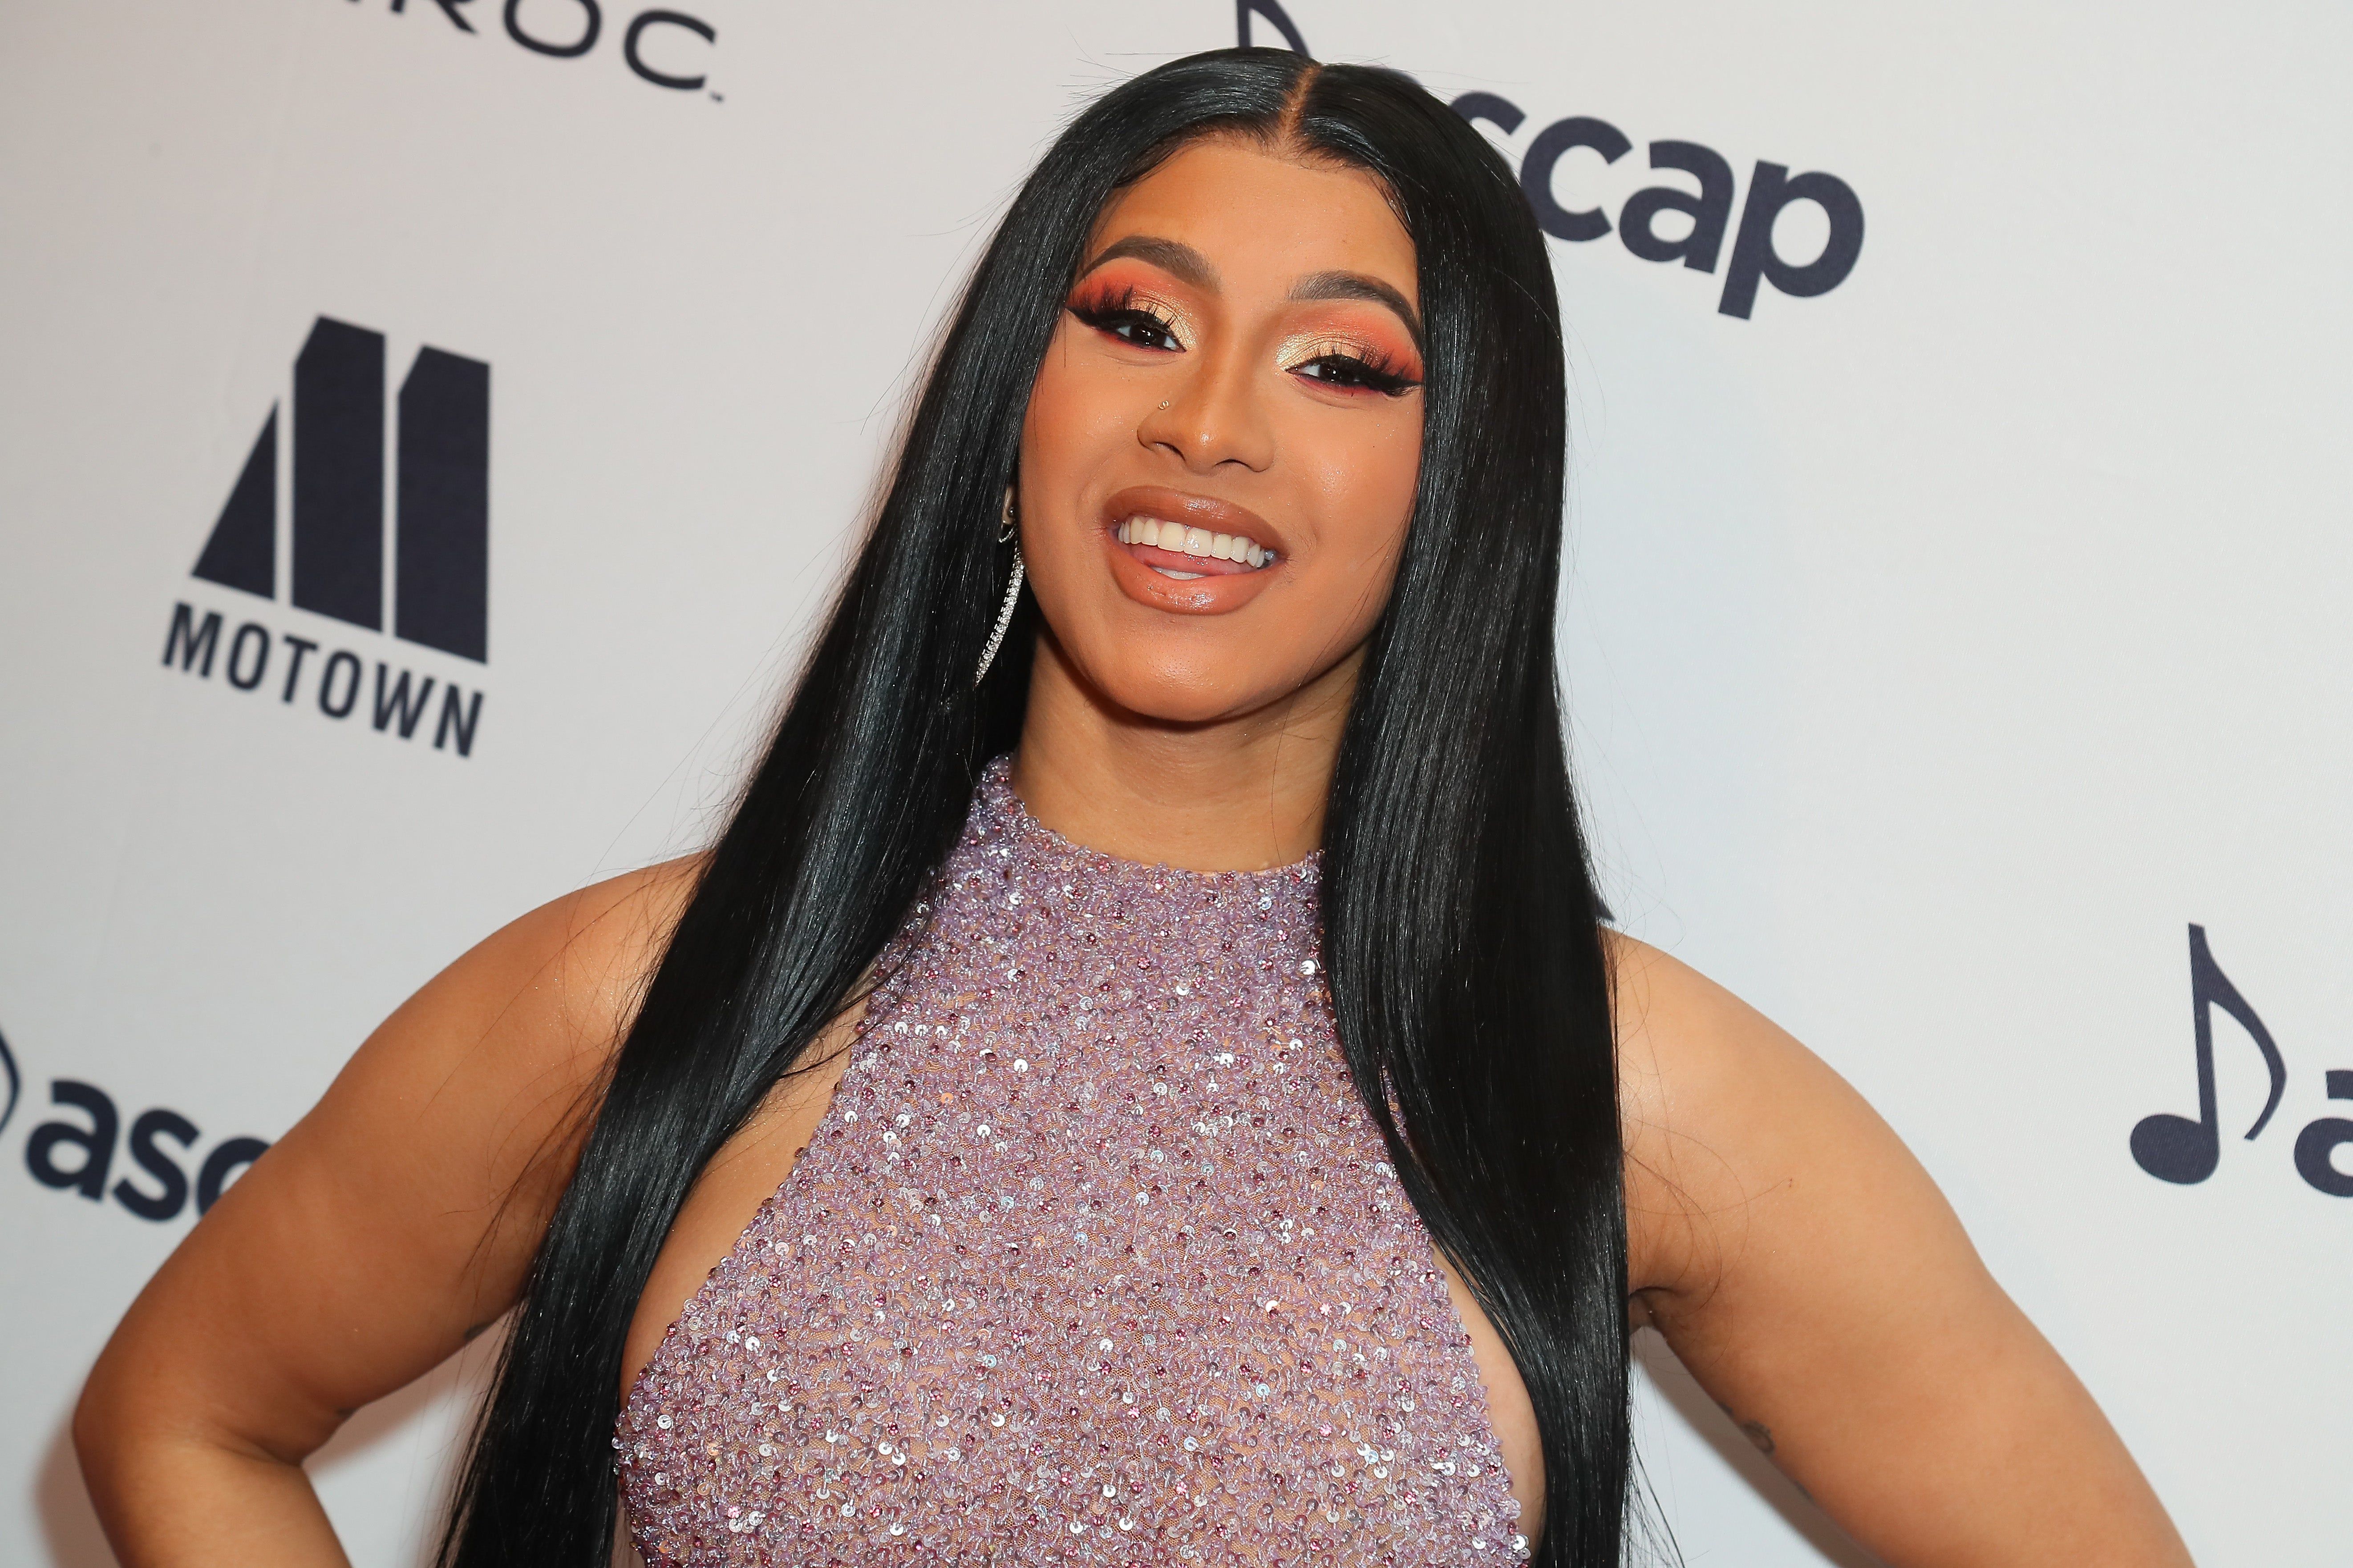 Cardi B Sports Matching Outfit With Daughter Kulture at Her 1st Birthday Party